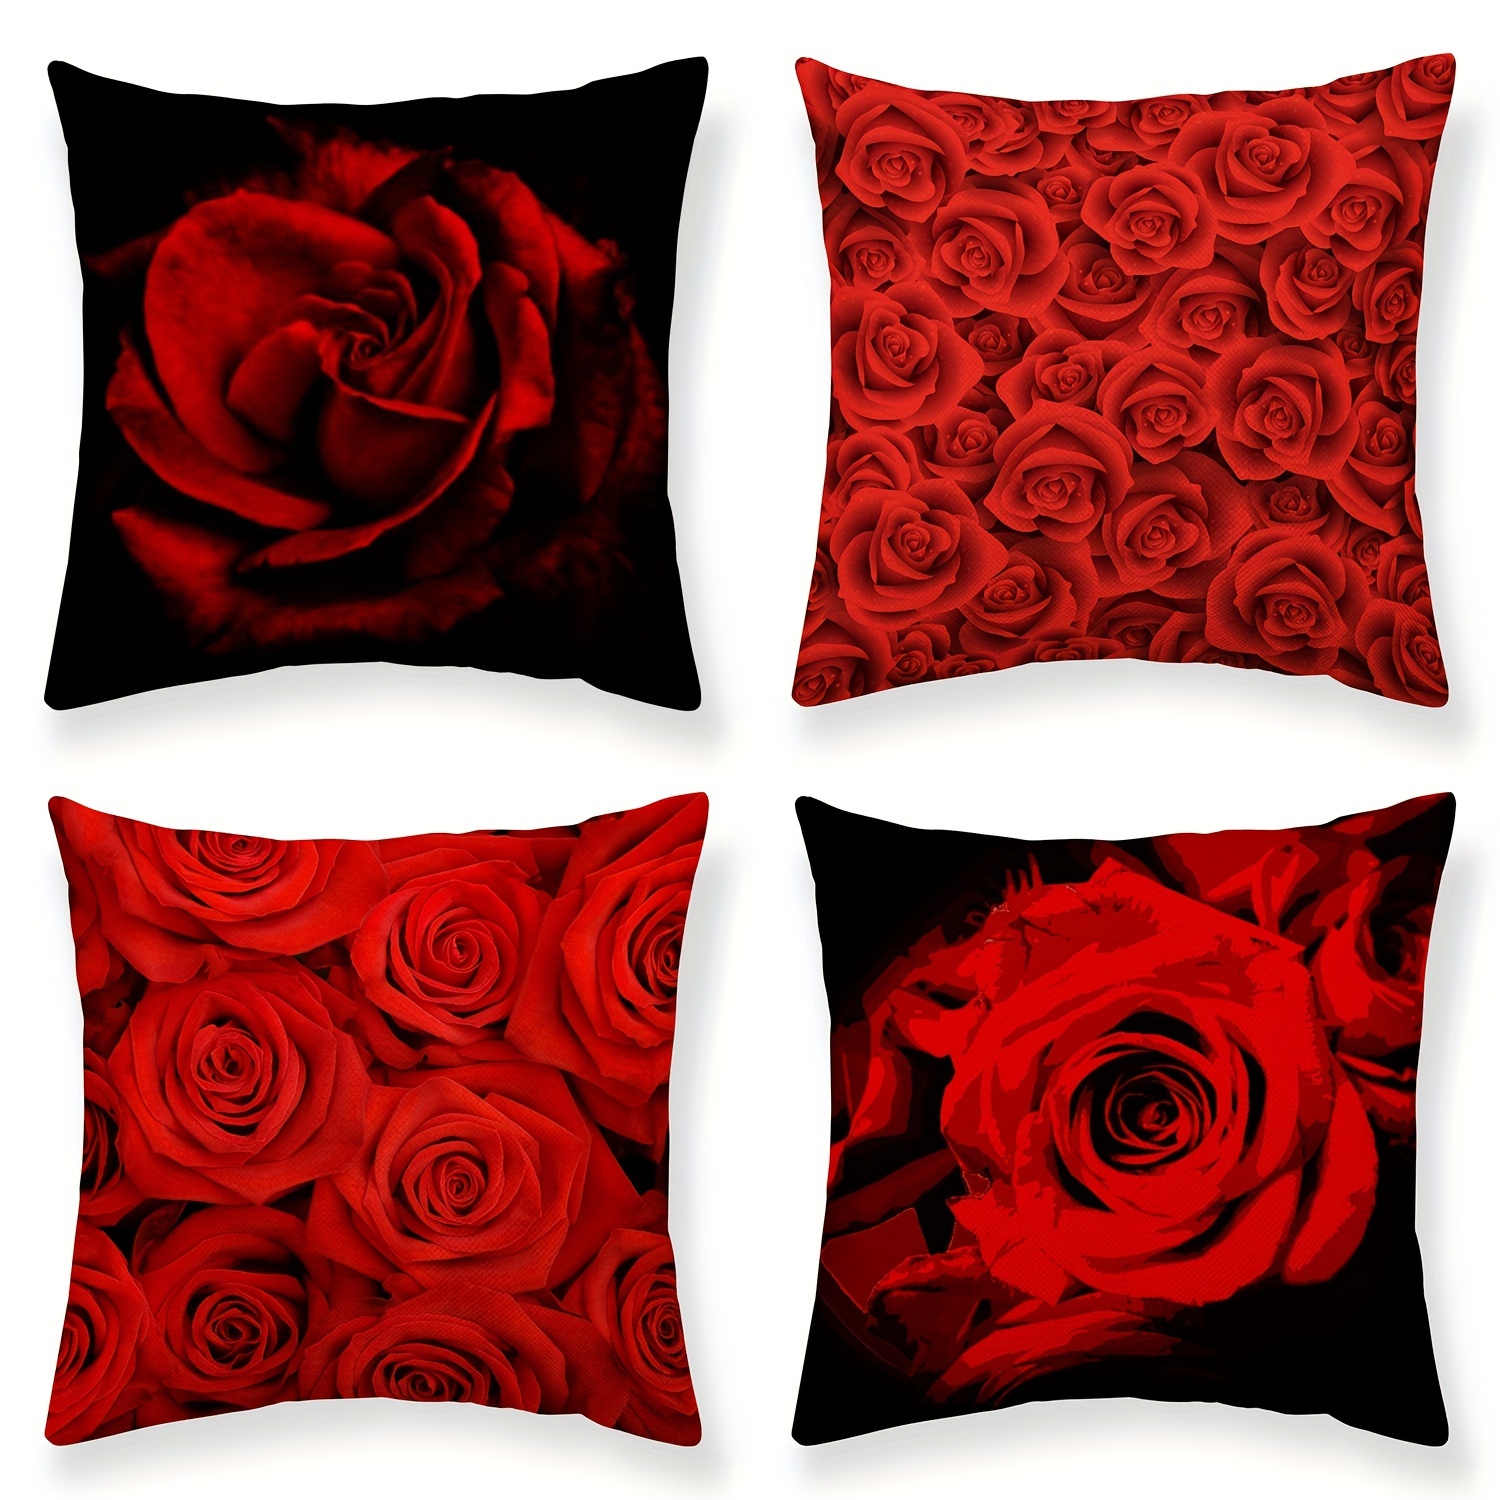 

4pcs, Red Rose Printed Polyester Cushion Cover, Pillow Cover, Room Decor, Bedroom Decor, Sofa Decor, Collectible Buildings Accessories (cushion Is Not Included)